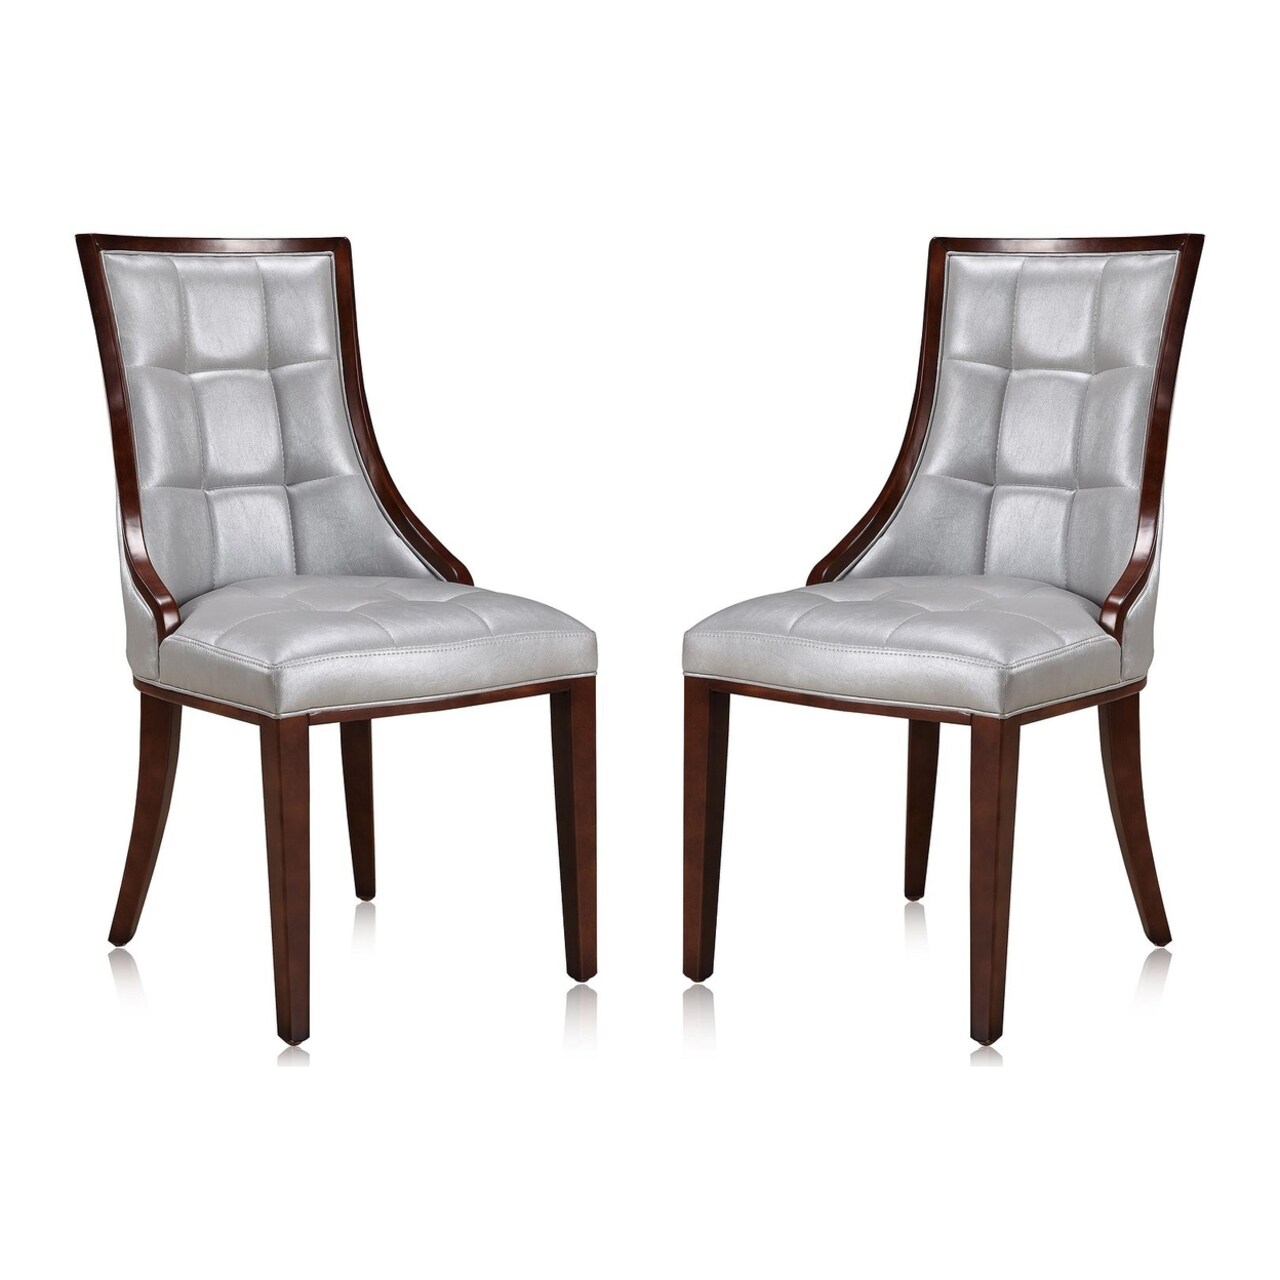 Manhattan Comfort Fifth Avenue Faux Leather Dining Chair and Walnut (Set of 2)